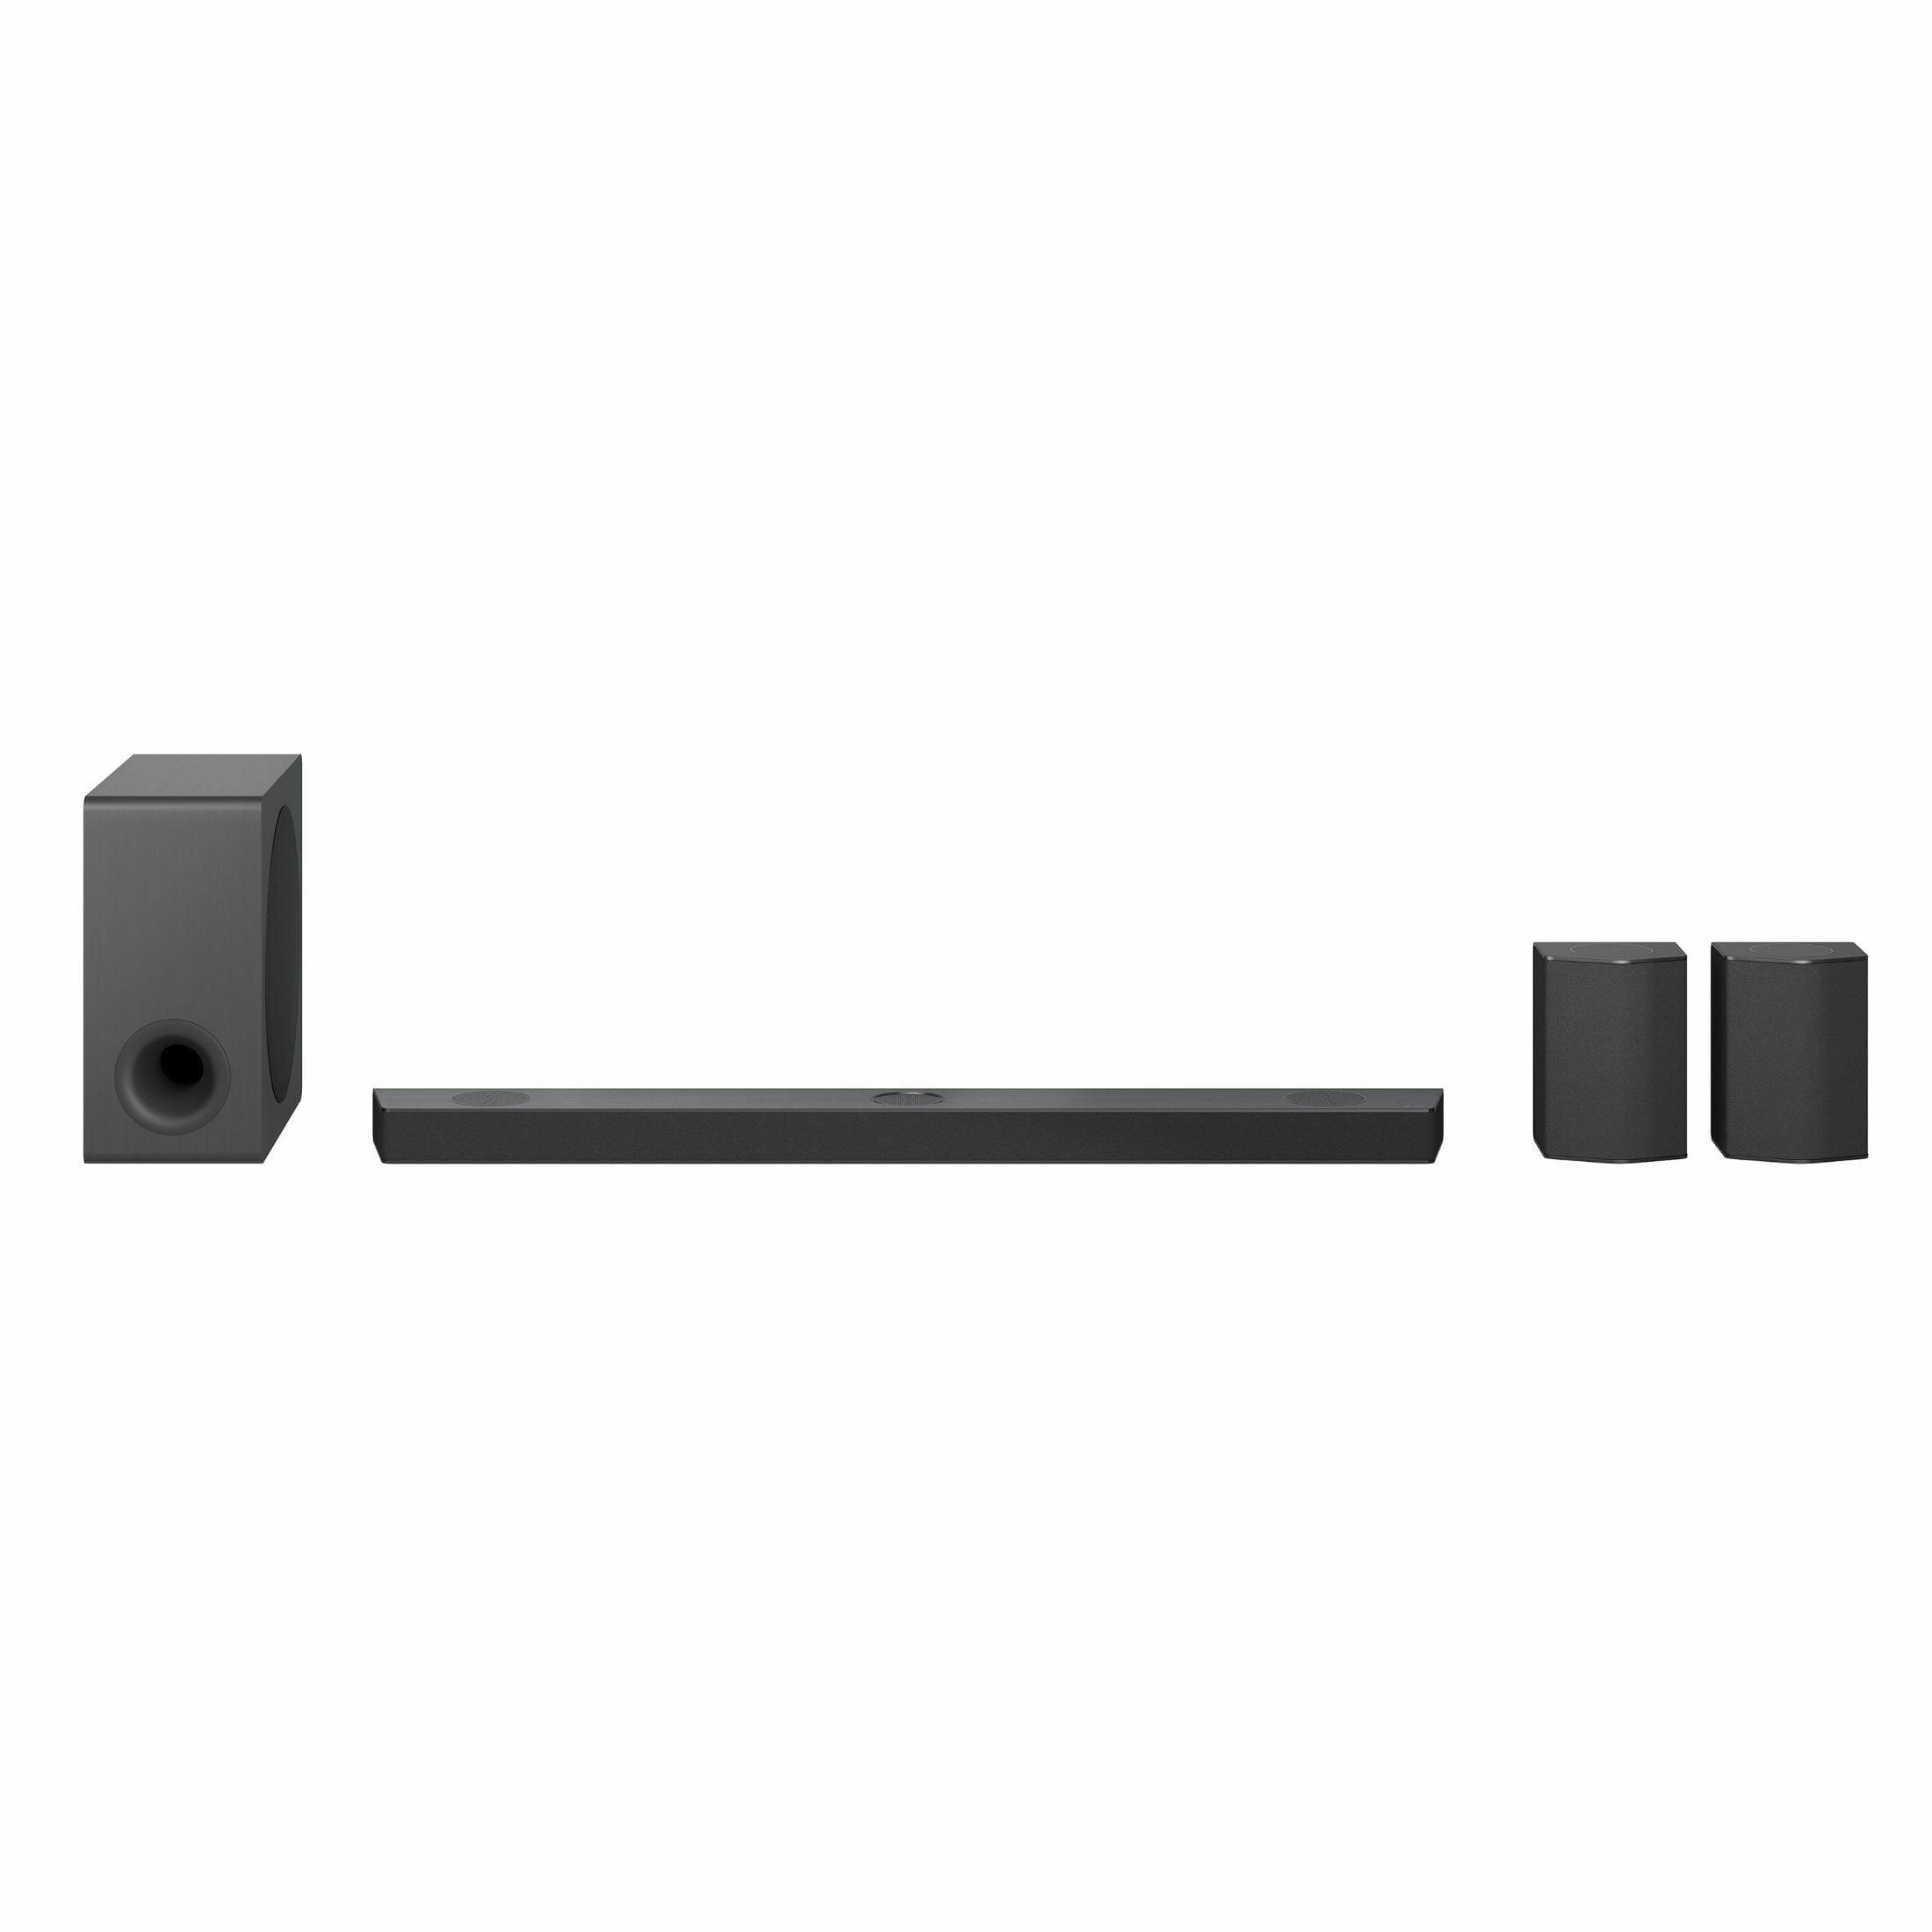 LG Sound Bar with Surround Speakers S95QR - 9.1.5 Channel, 810 Watts  Output, Home Theater Audio with Dolby Atmos, DTS:X, and IMAX Enhanced, Black